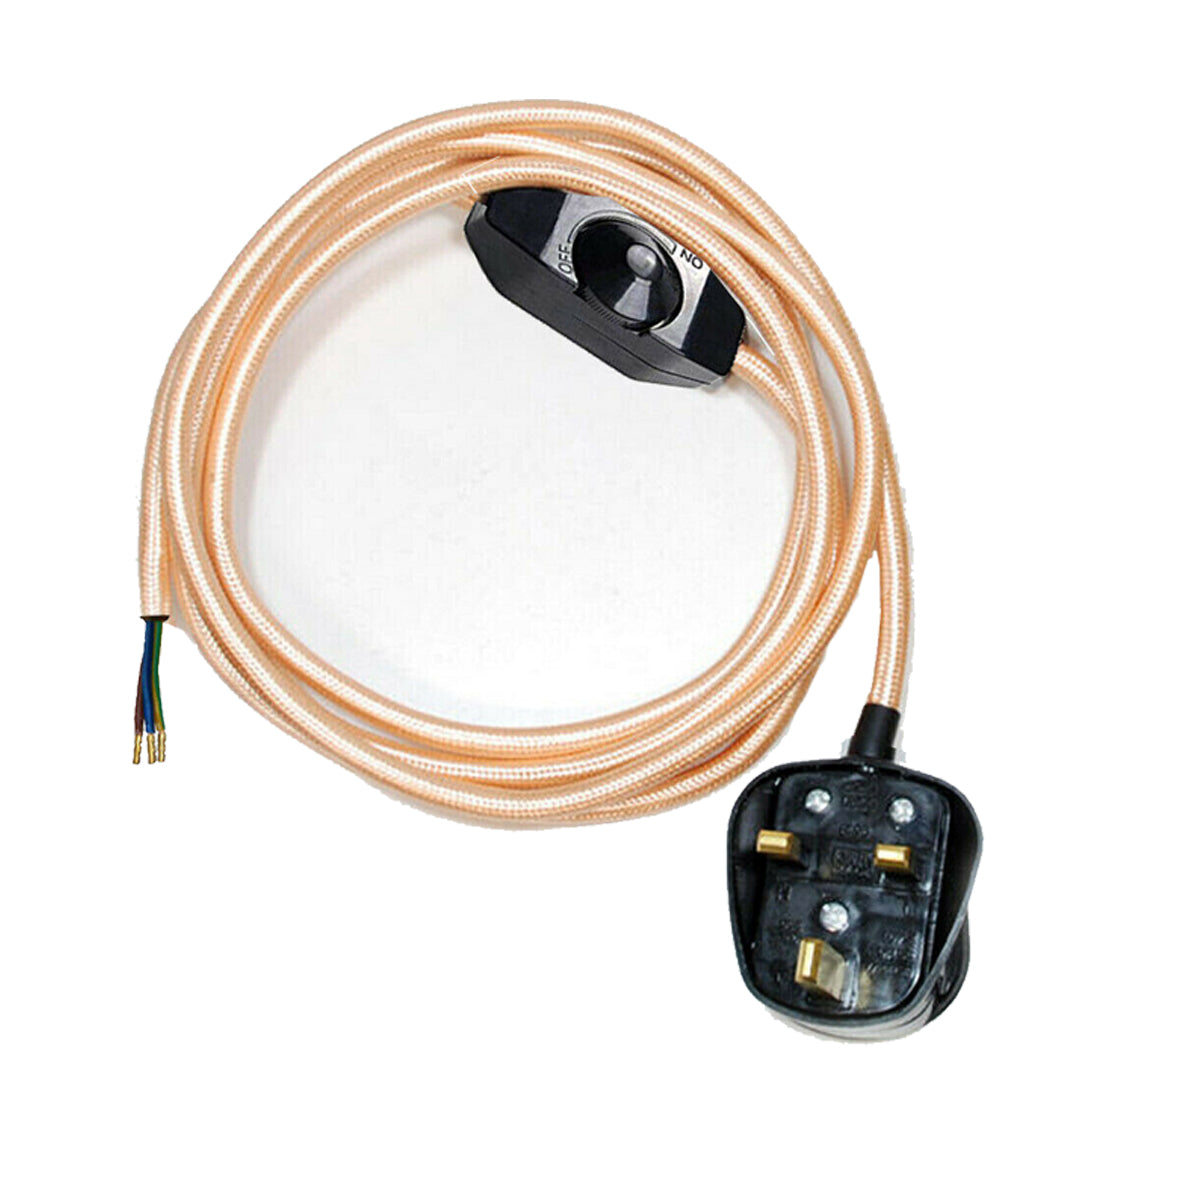 Dimmer Switch 2m Fabric Flex Cable Plug In Pendant With Short Holder~1611 - LEDSone UK Ltd